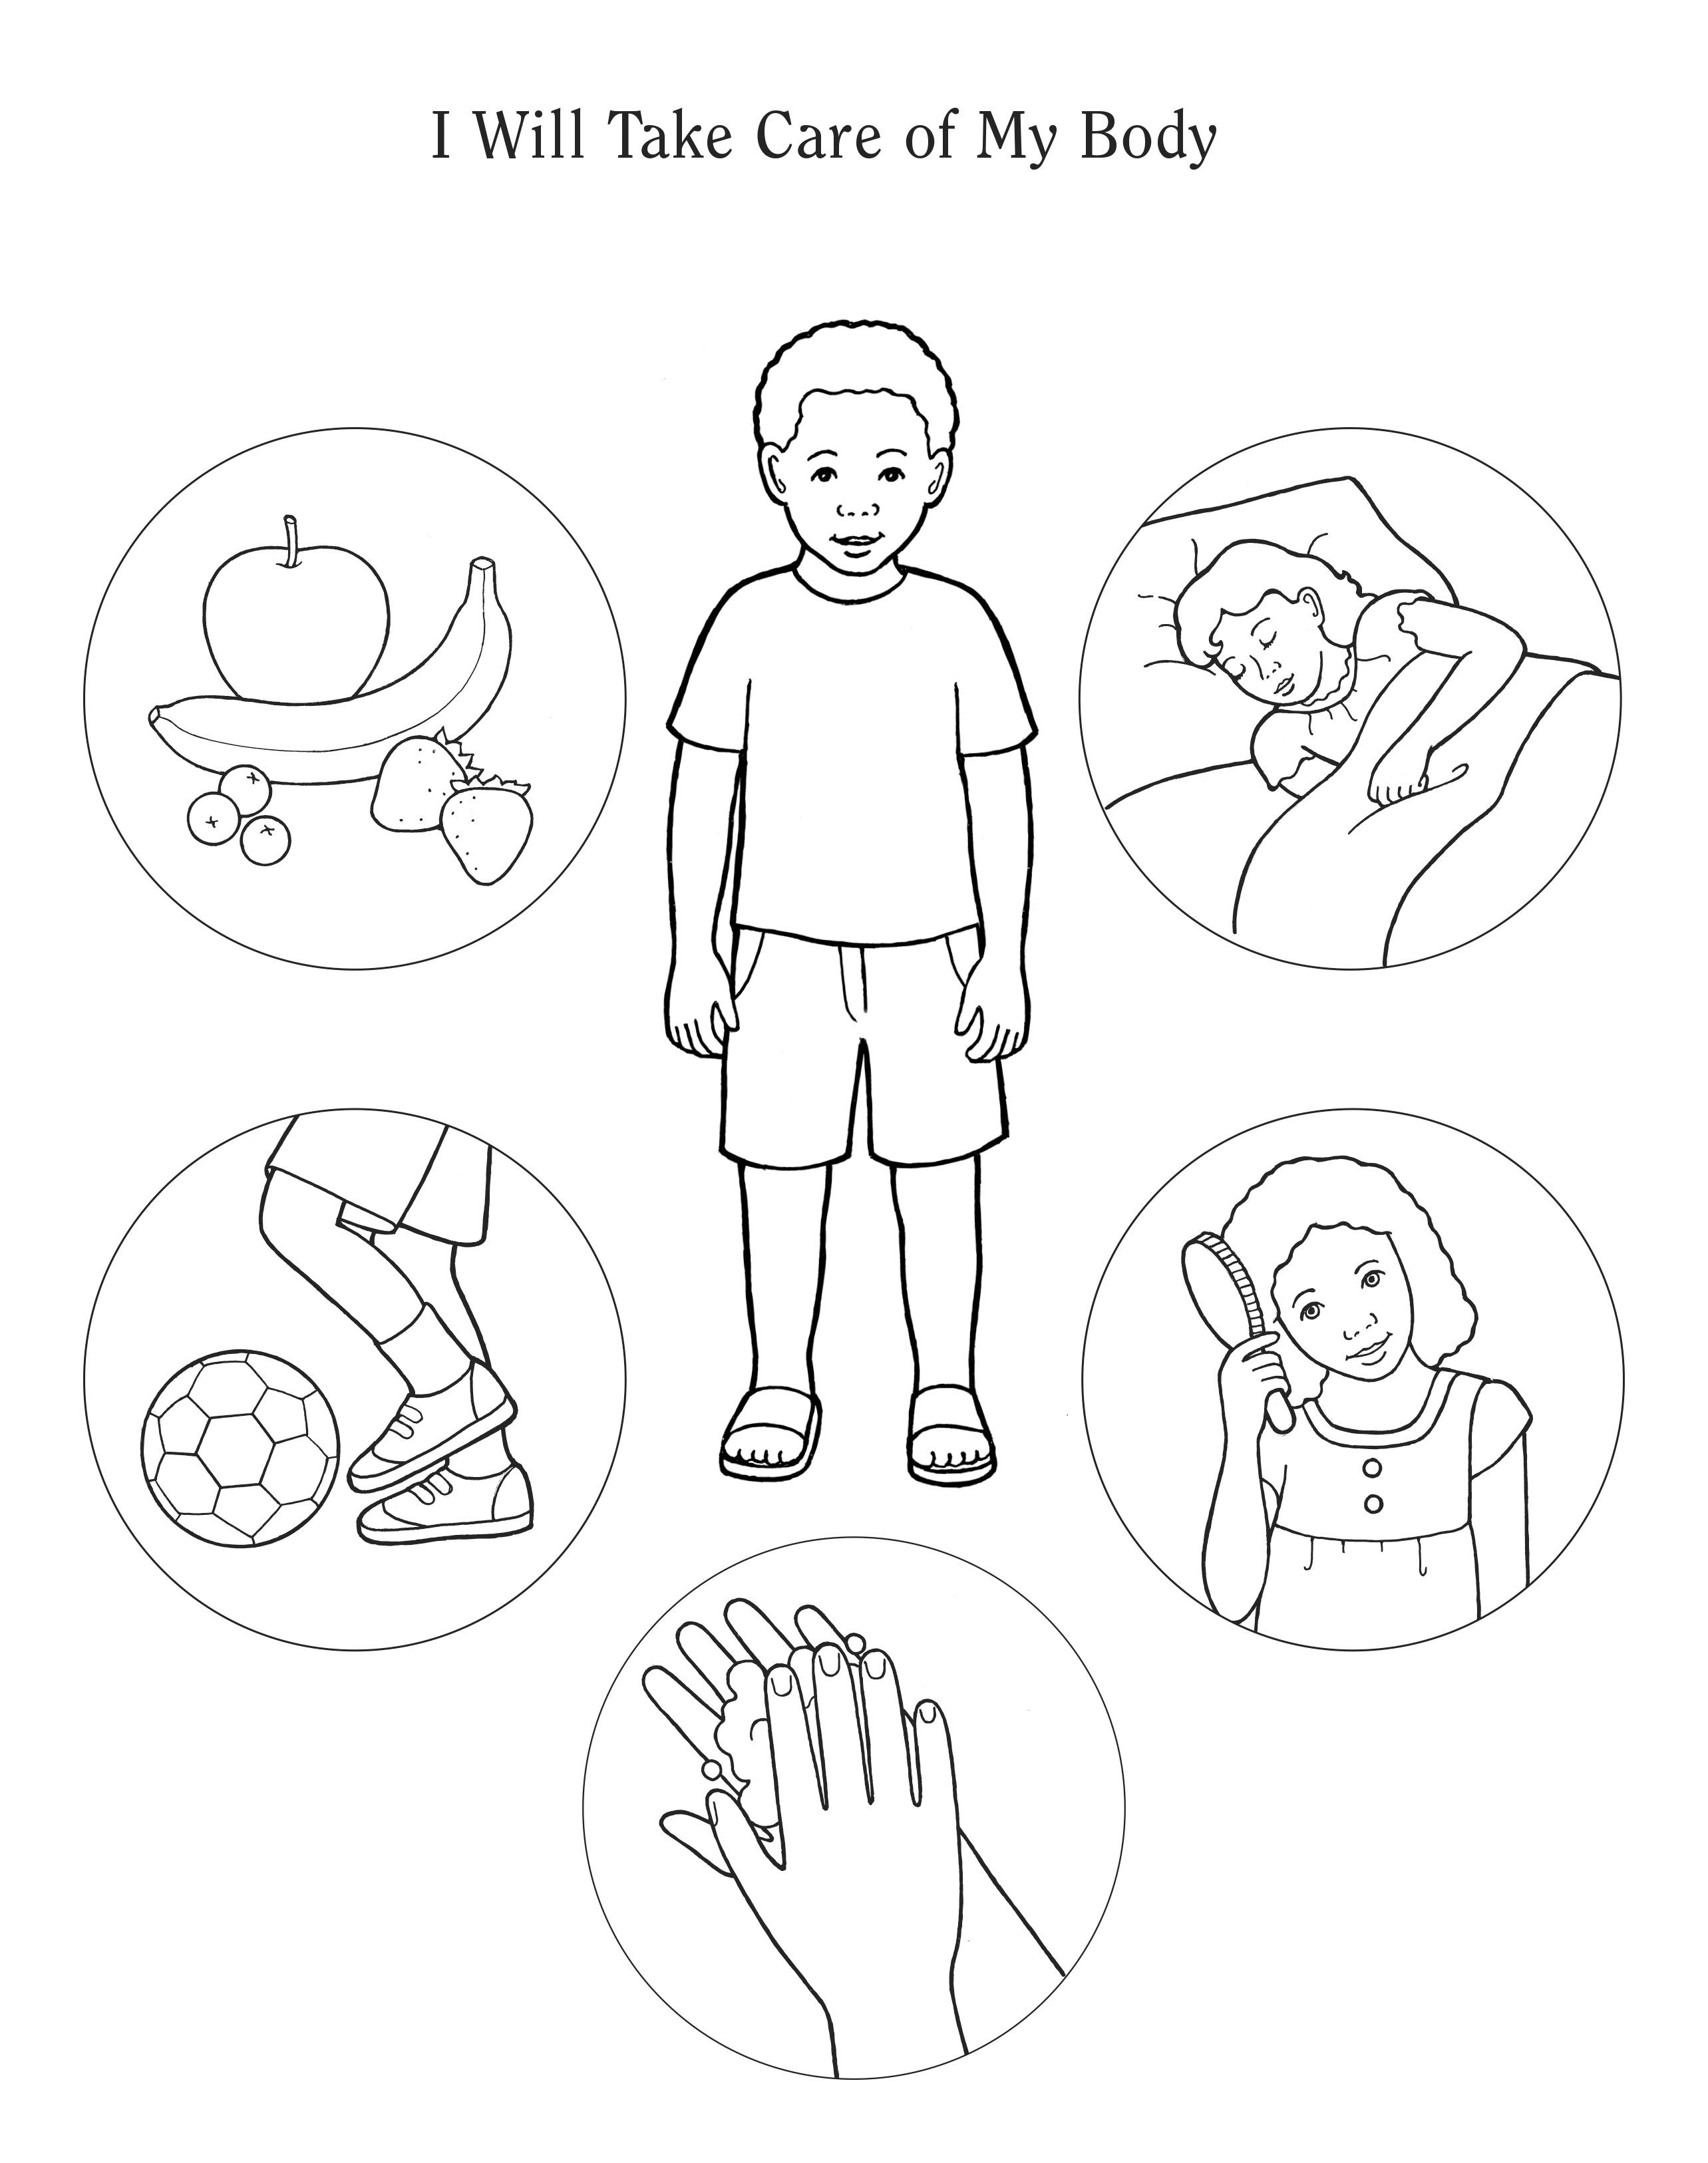 Nursery Manual Page 47 I Will Take Care Of My Body